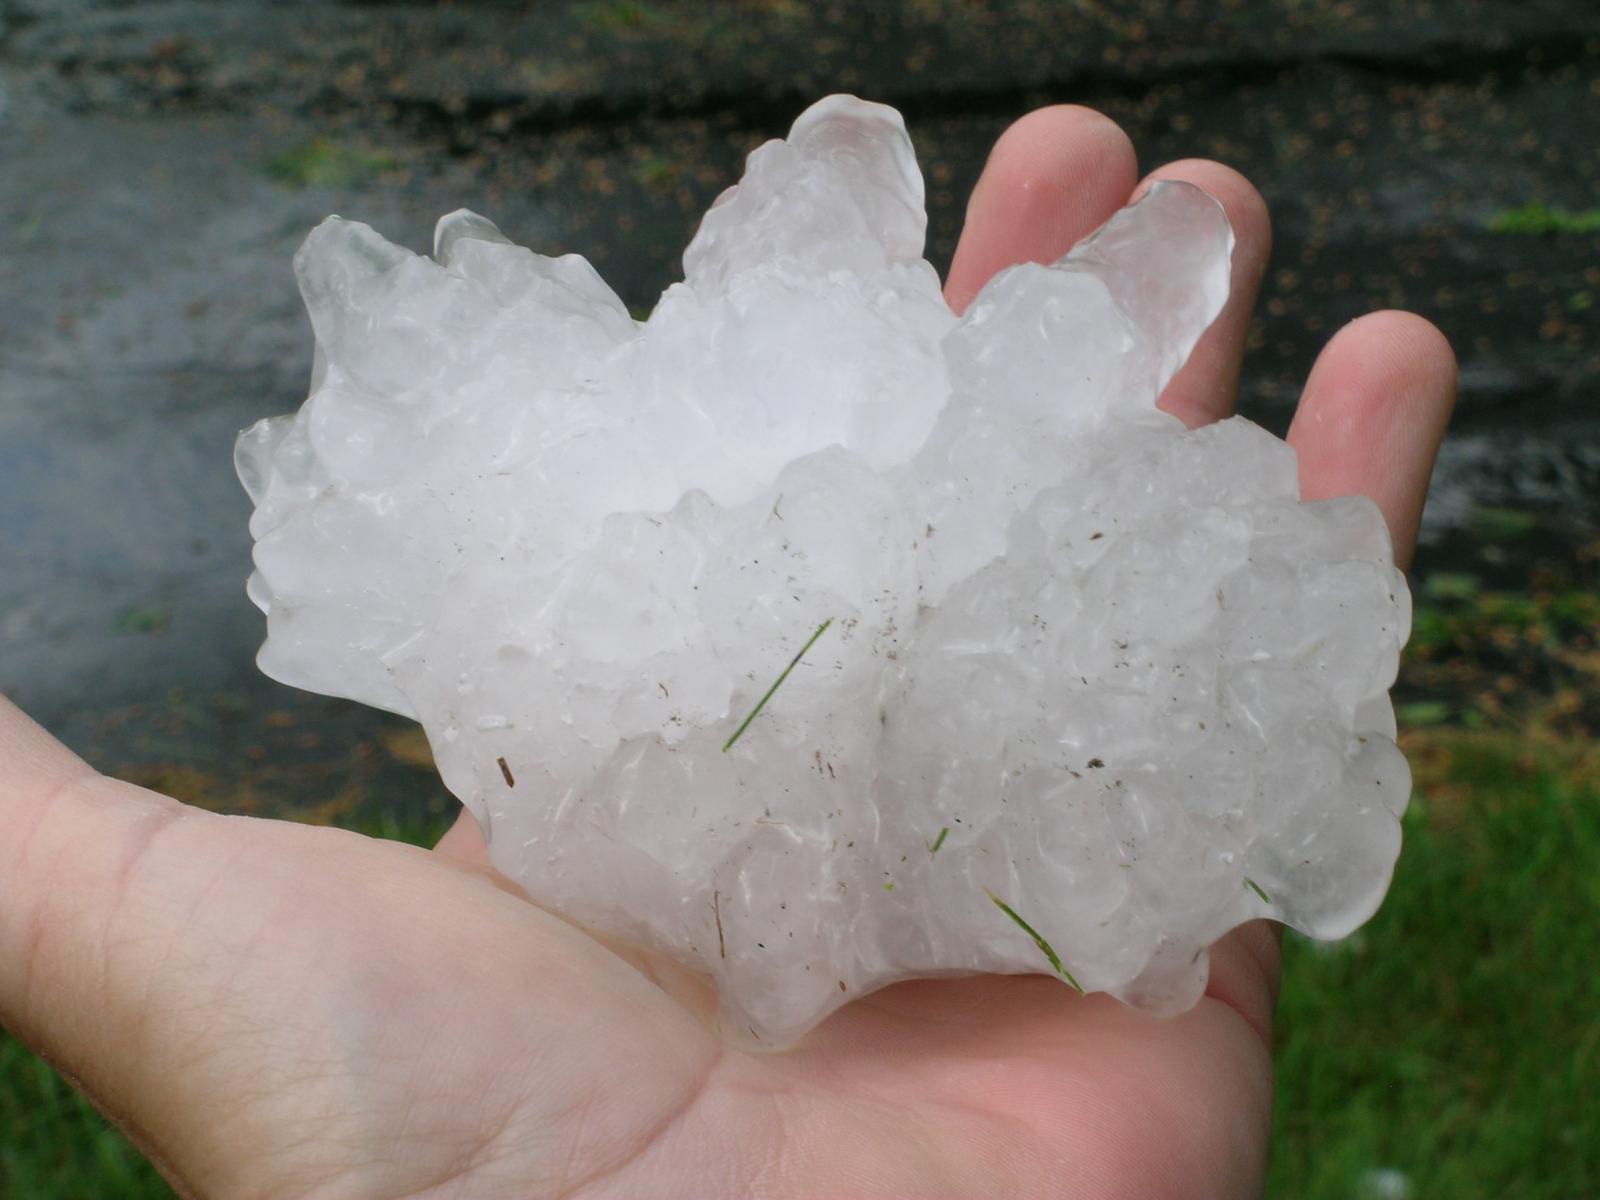 Hail near Wisconsin Rapids [click to enlarge]